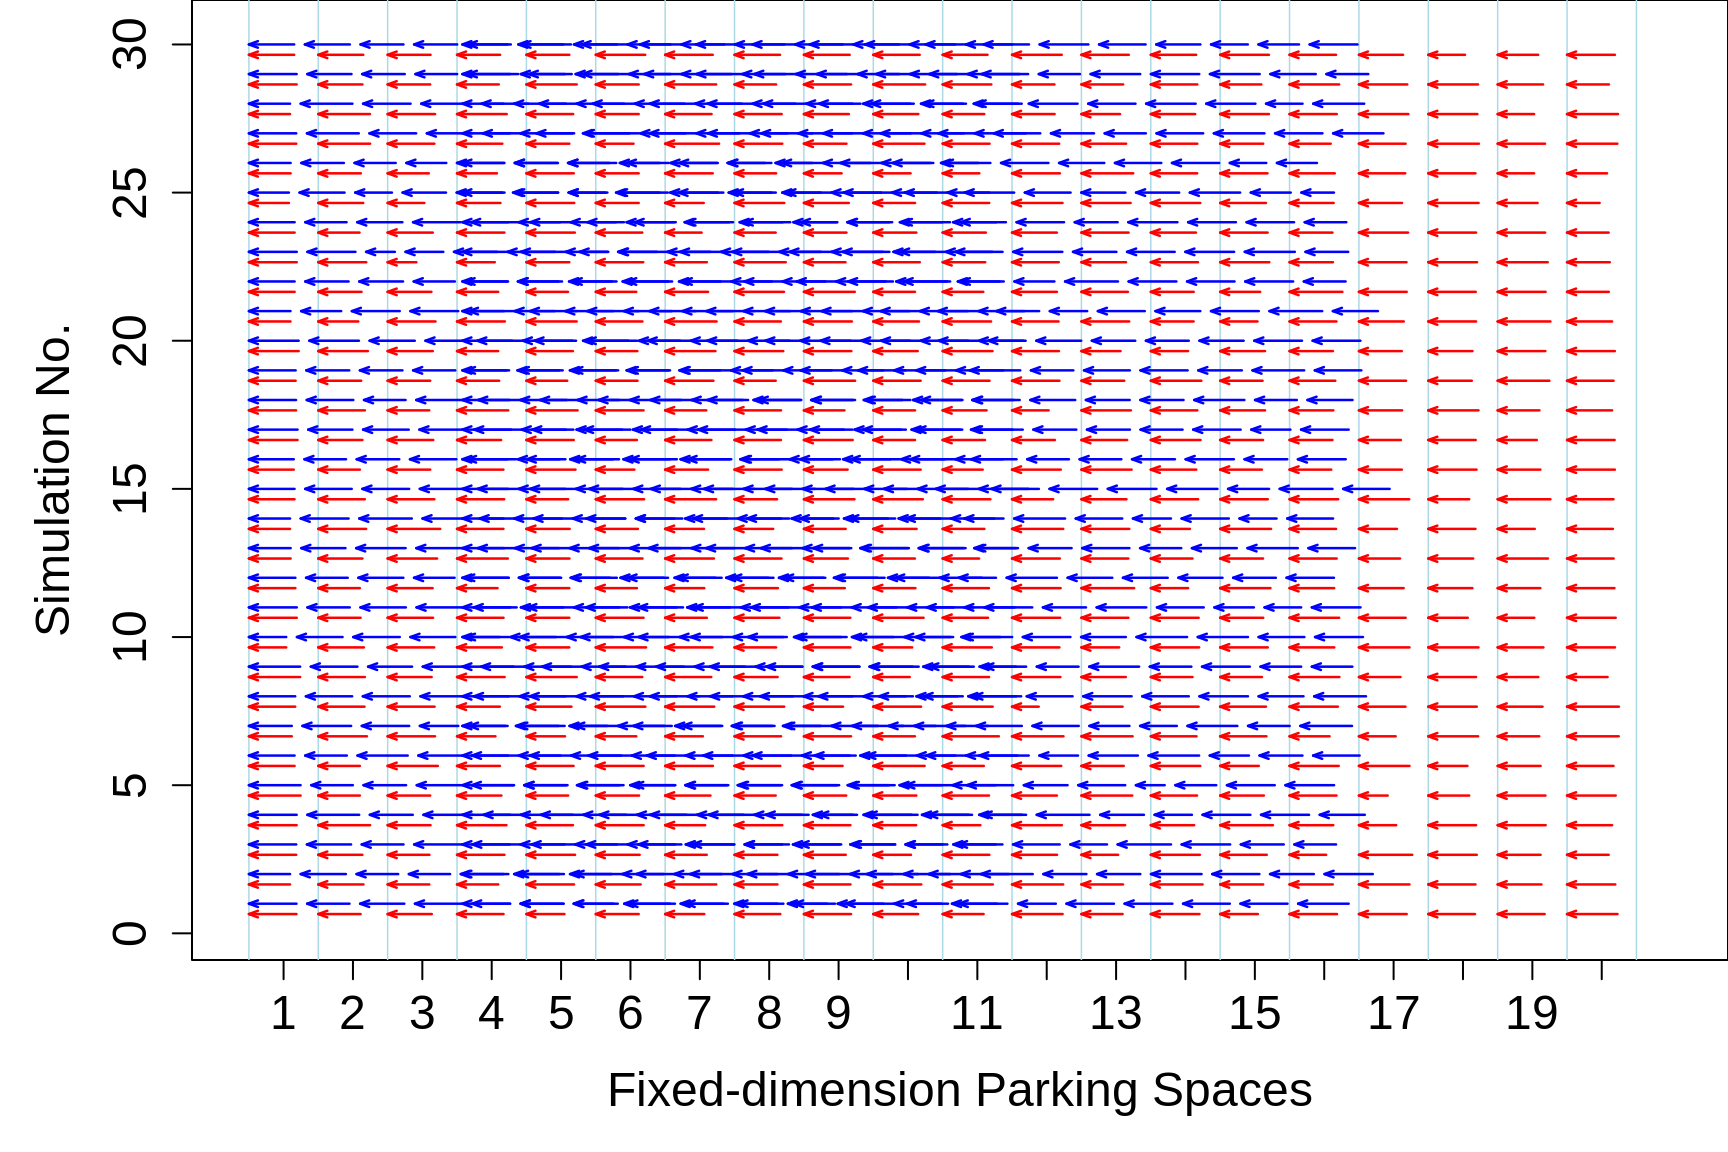 30 simulations of the possible gains from using variable-length (parallel) parking spaces.  Shown are 20 fixed-length spaces, each of length 6.5m. In each simulation, 20 cars are selected randomly from the just-described frequency distribution, and their lengths are shown as red lines within the fixed-length parking spaces, and as blues lines, with 1m spacing, in the variable-length scheme.